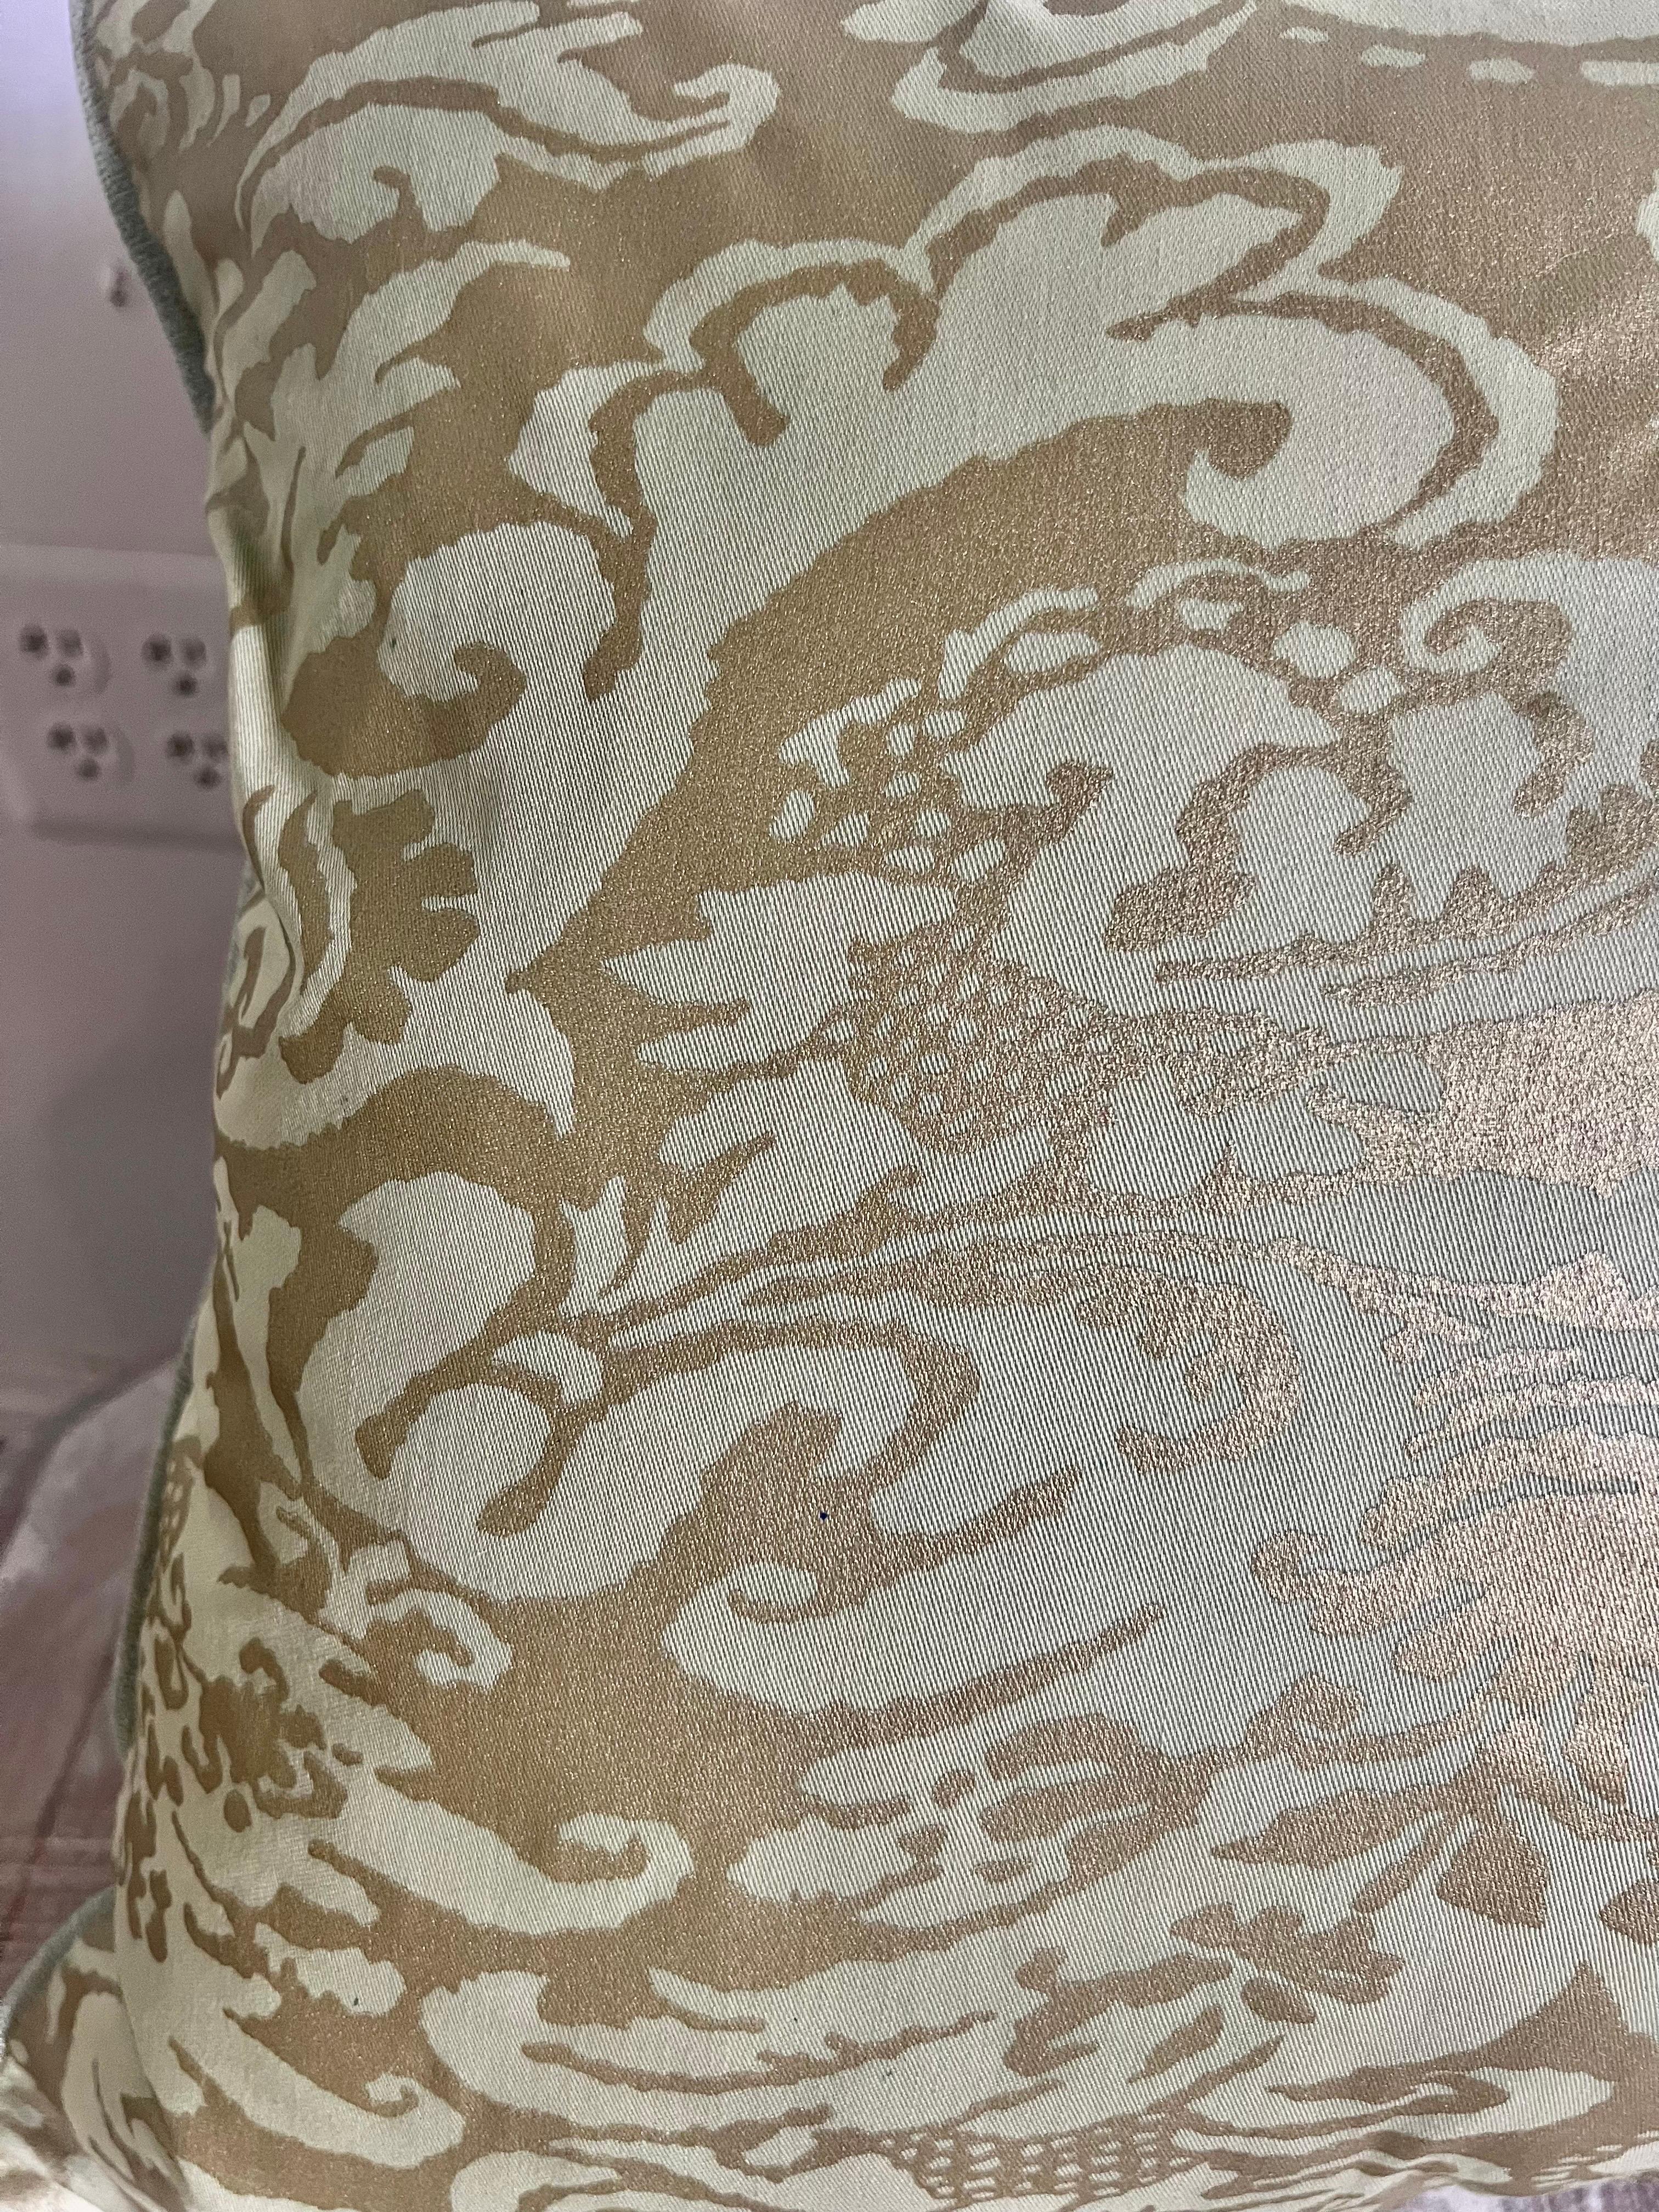 Pair of custom pillows made with metallic gold & celadon colored Fortuny style fronts and celadon silk backs.  Down filled inserts w/ hidden zippers for easy cleaning.